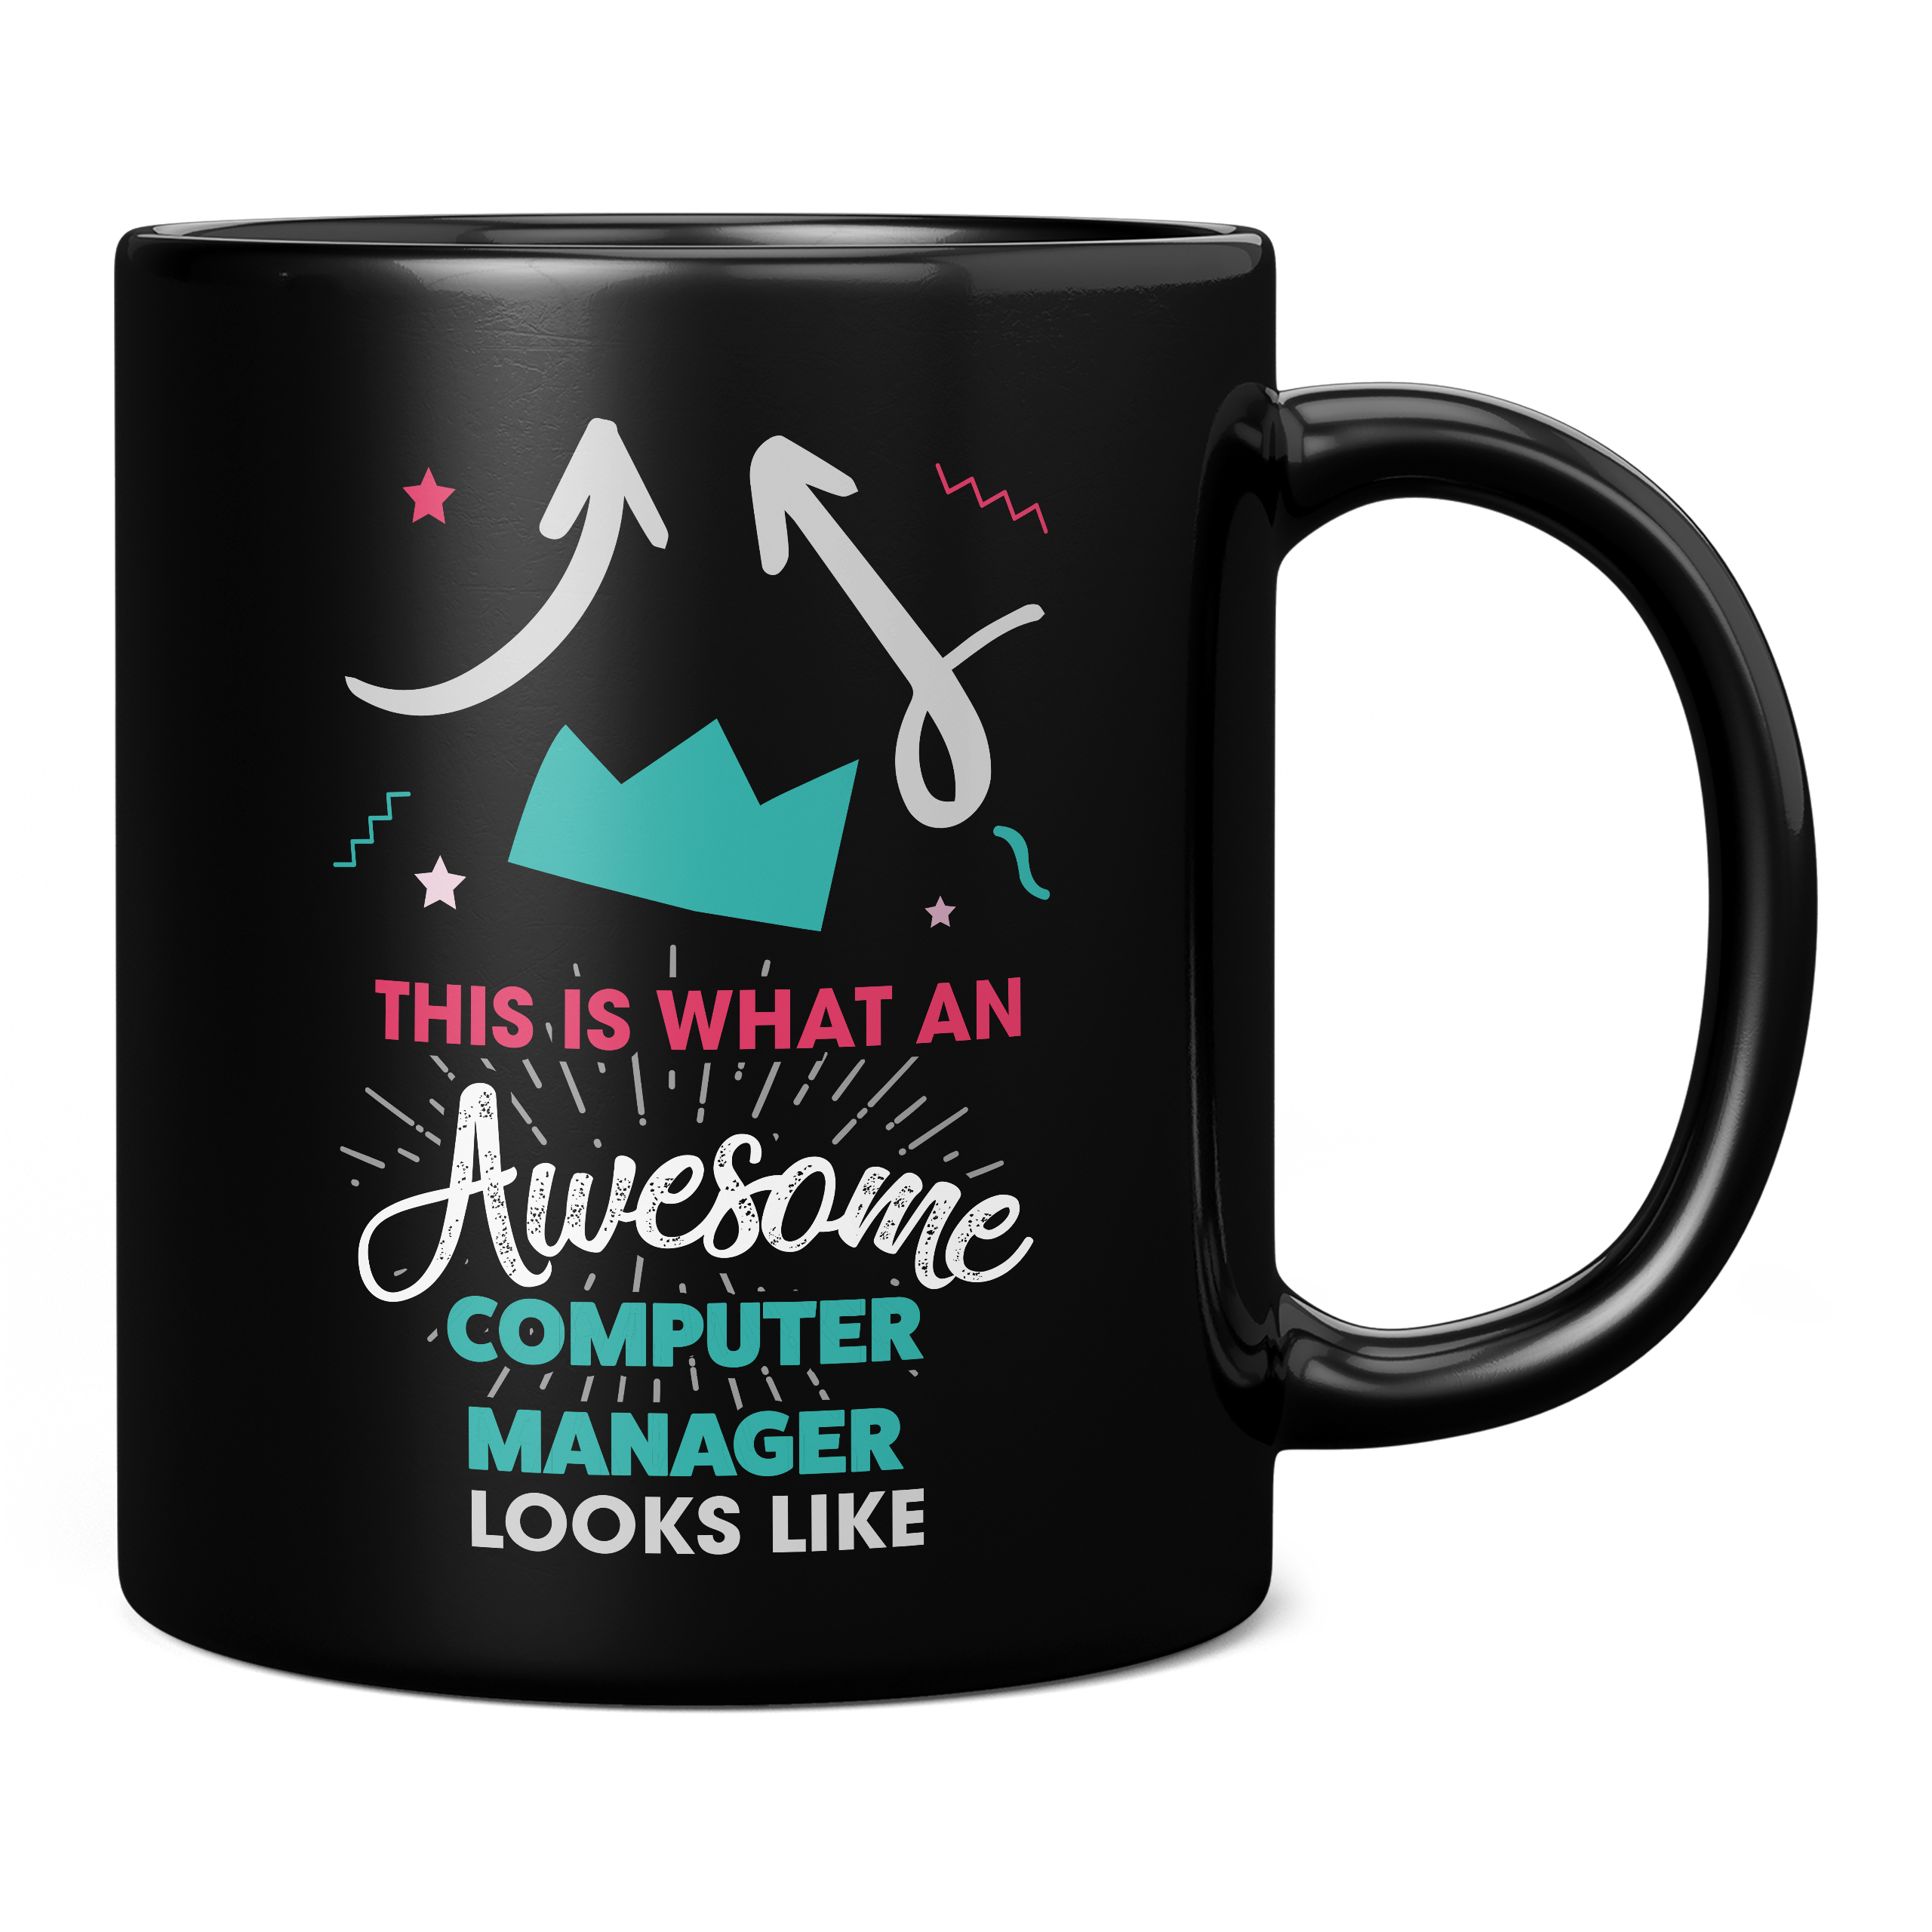 THIS IS WHAT AN AWESOME COMPUTER MANAGER LOOKS LIKE 11OZ NOVELTY MUG